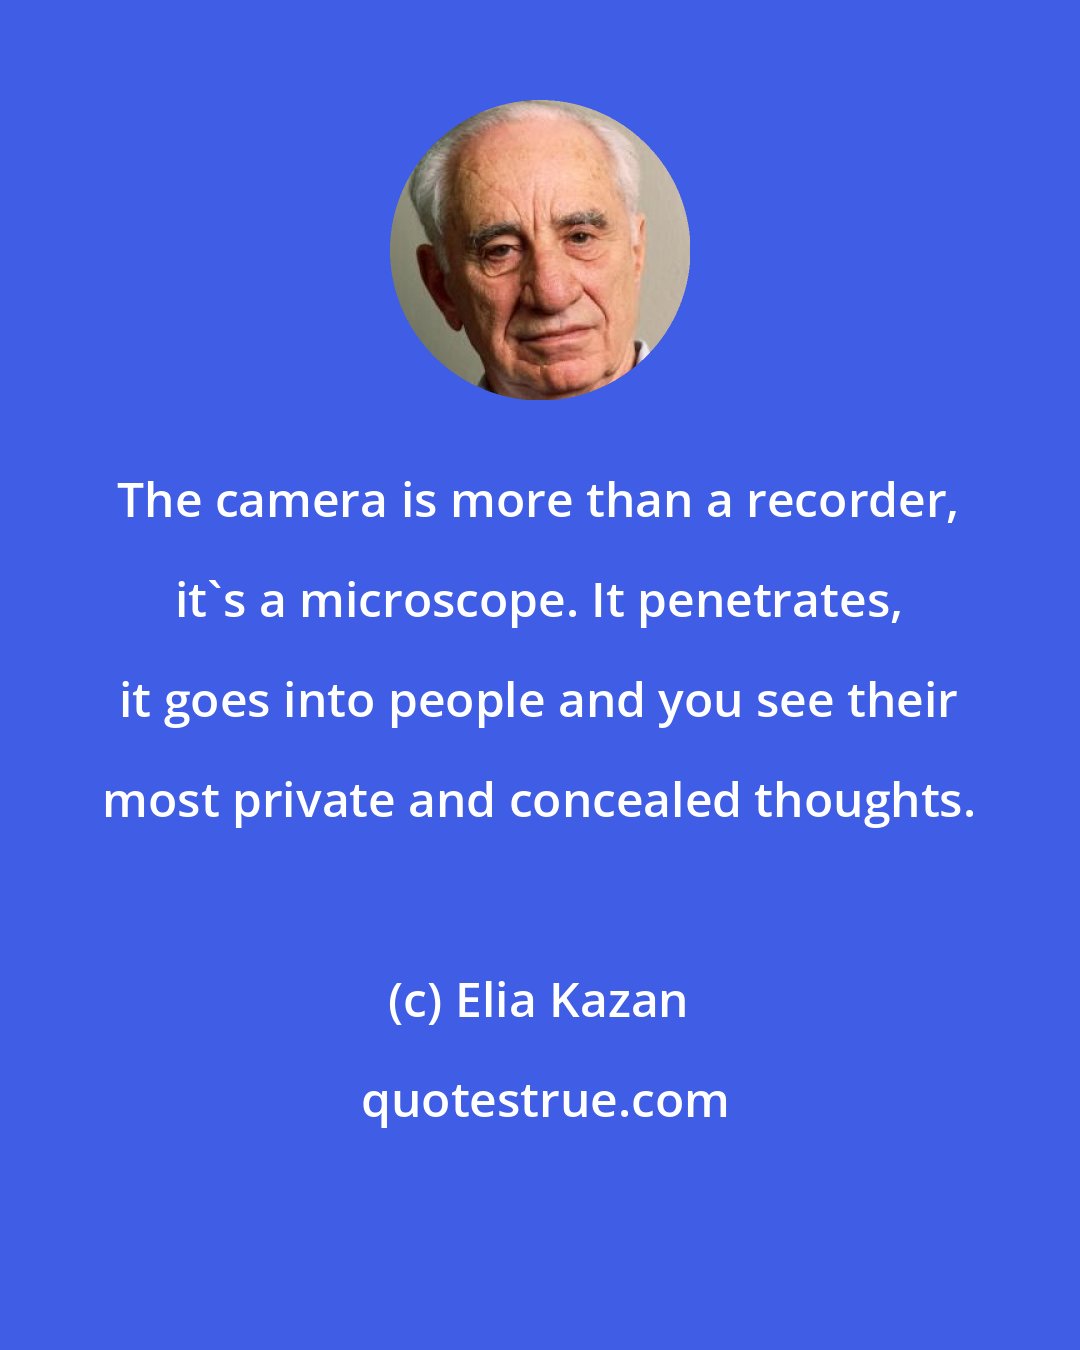 Elia Kazan: The camera is more than a recorder, it's a microscope. It penetrates, it goes into people and you see their most private and concealed thoughts.